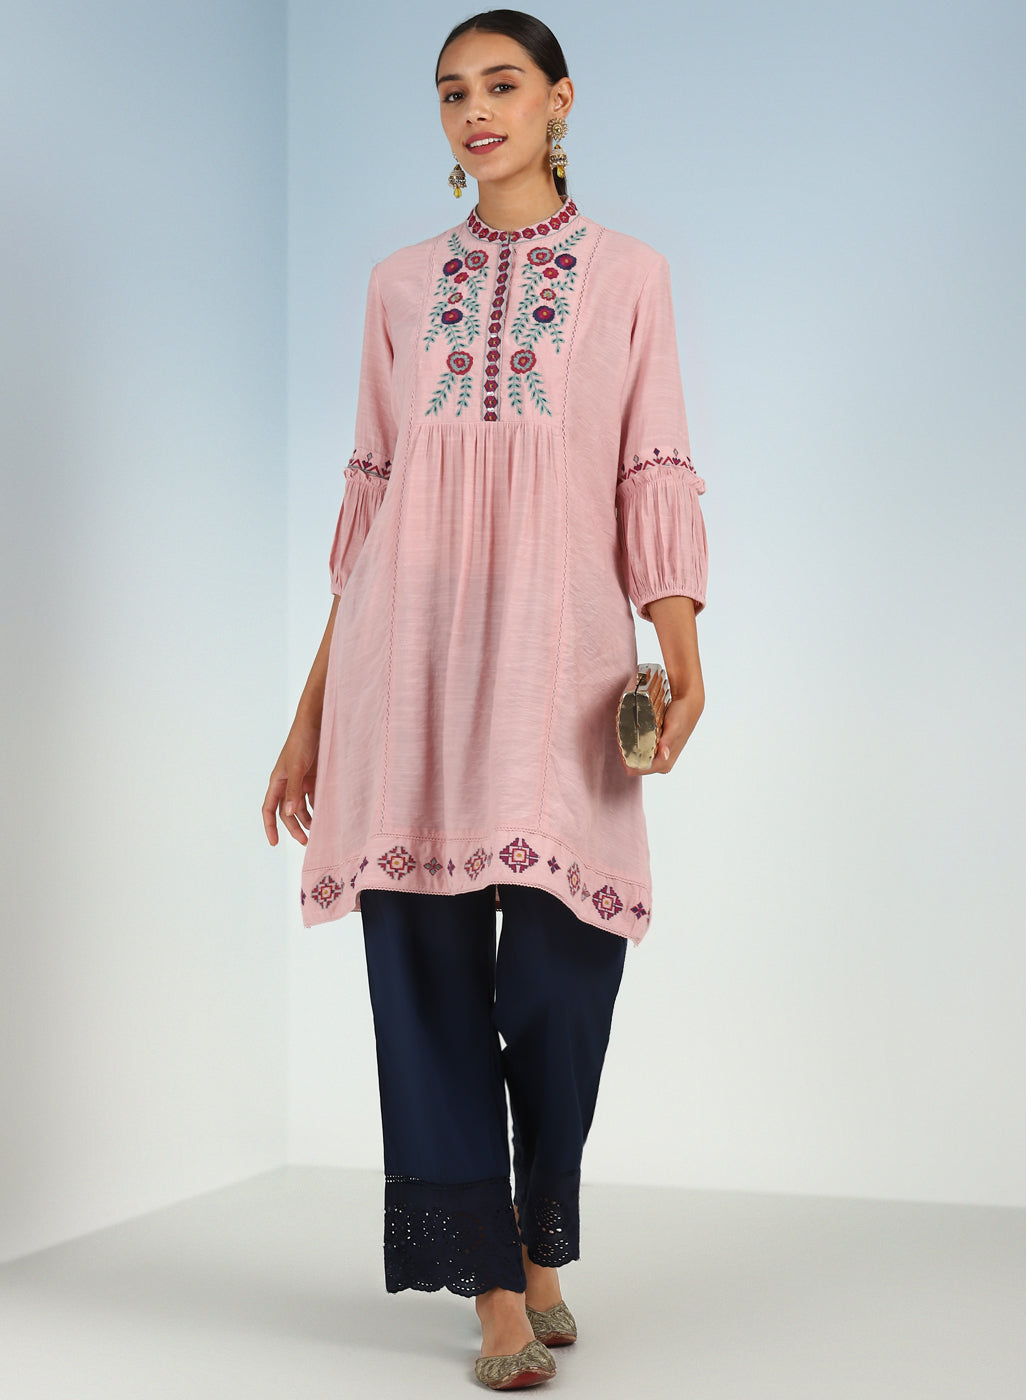 Buy Flowy Georgette Kurta's and Dresses for Women at Best Price | Lakshita